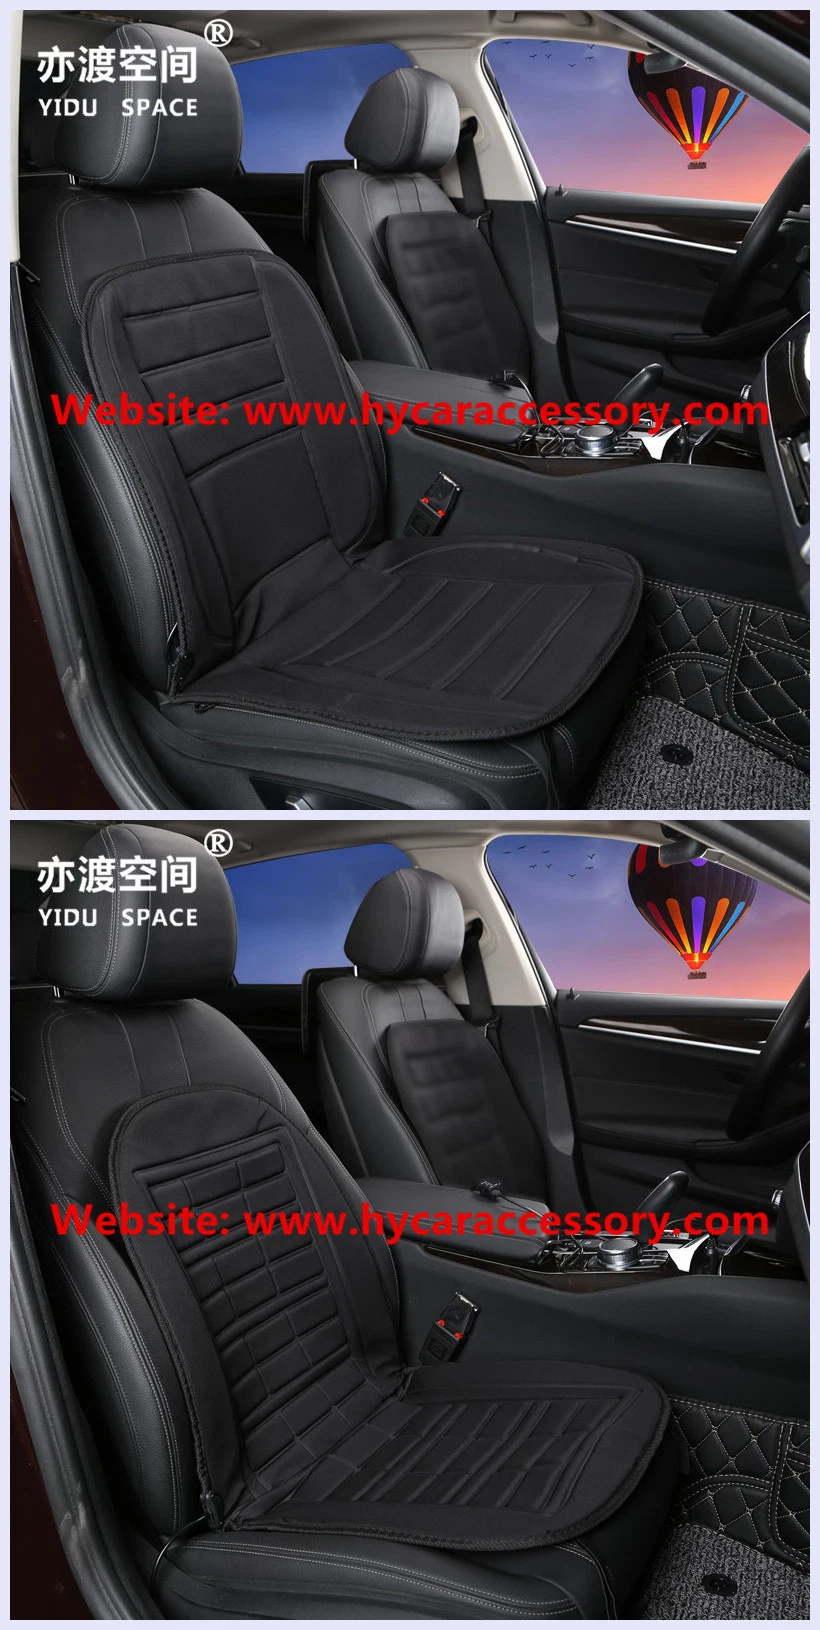 Wholesale 12V Black Universal Heated Car Seat Cover for Warmer